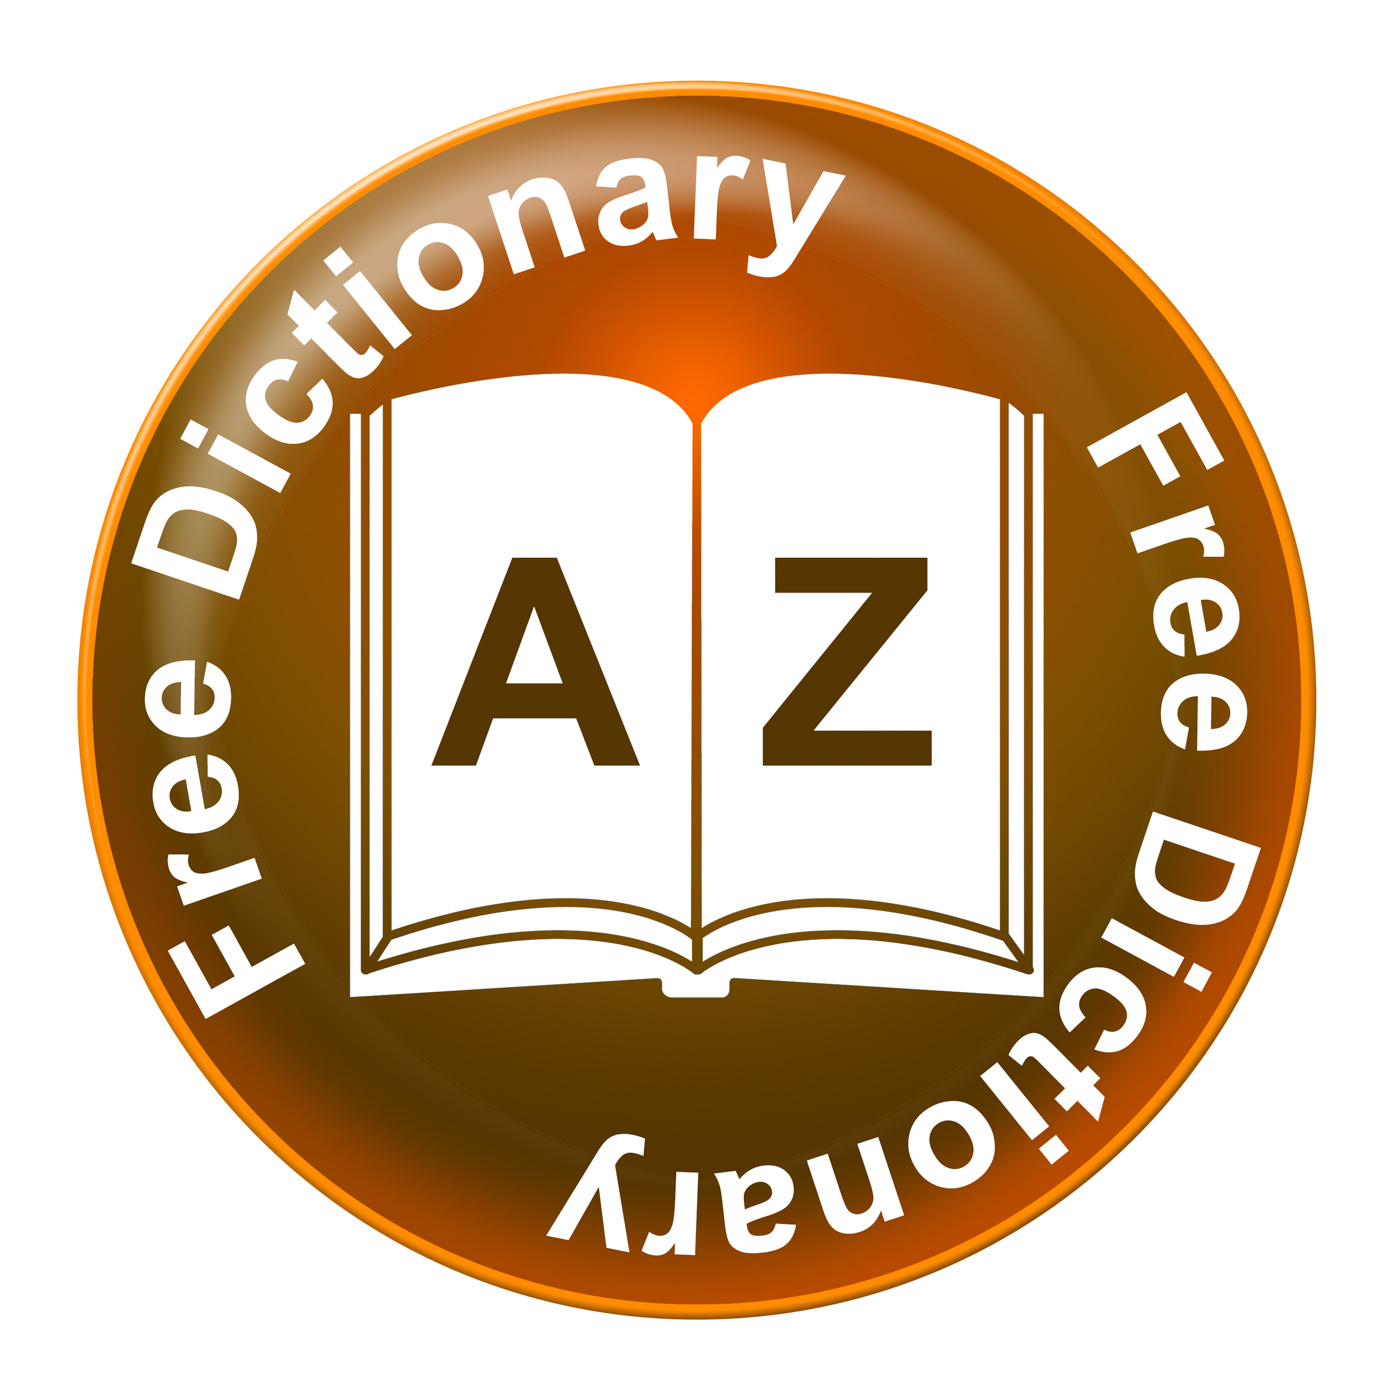 Free dictionary means no charge and dictionaries photo